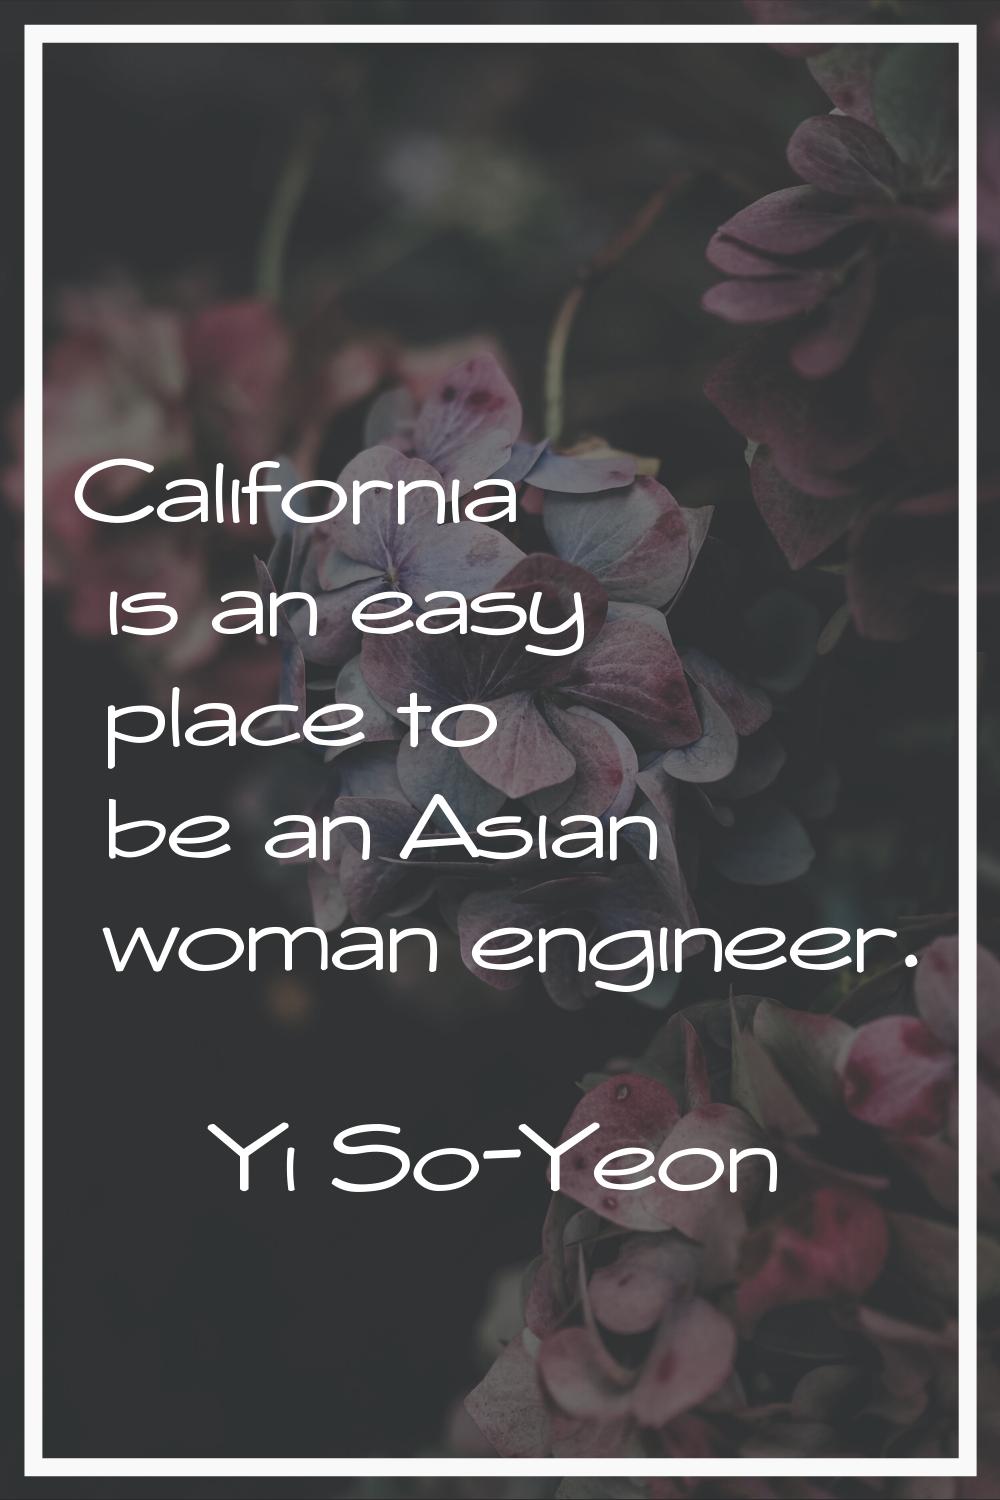 California is an easy place to be an Asian woman engineer.